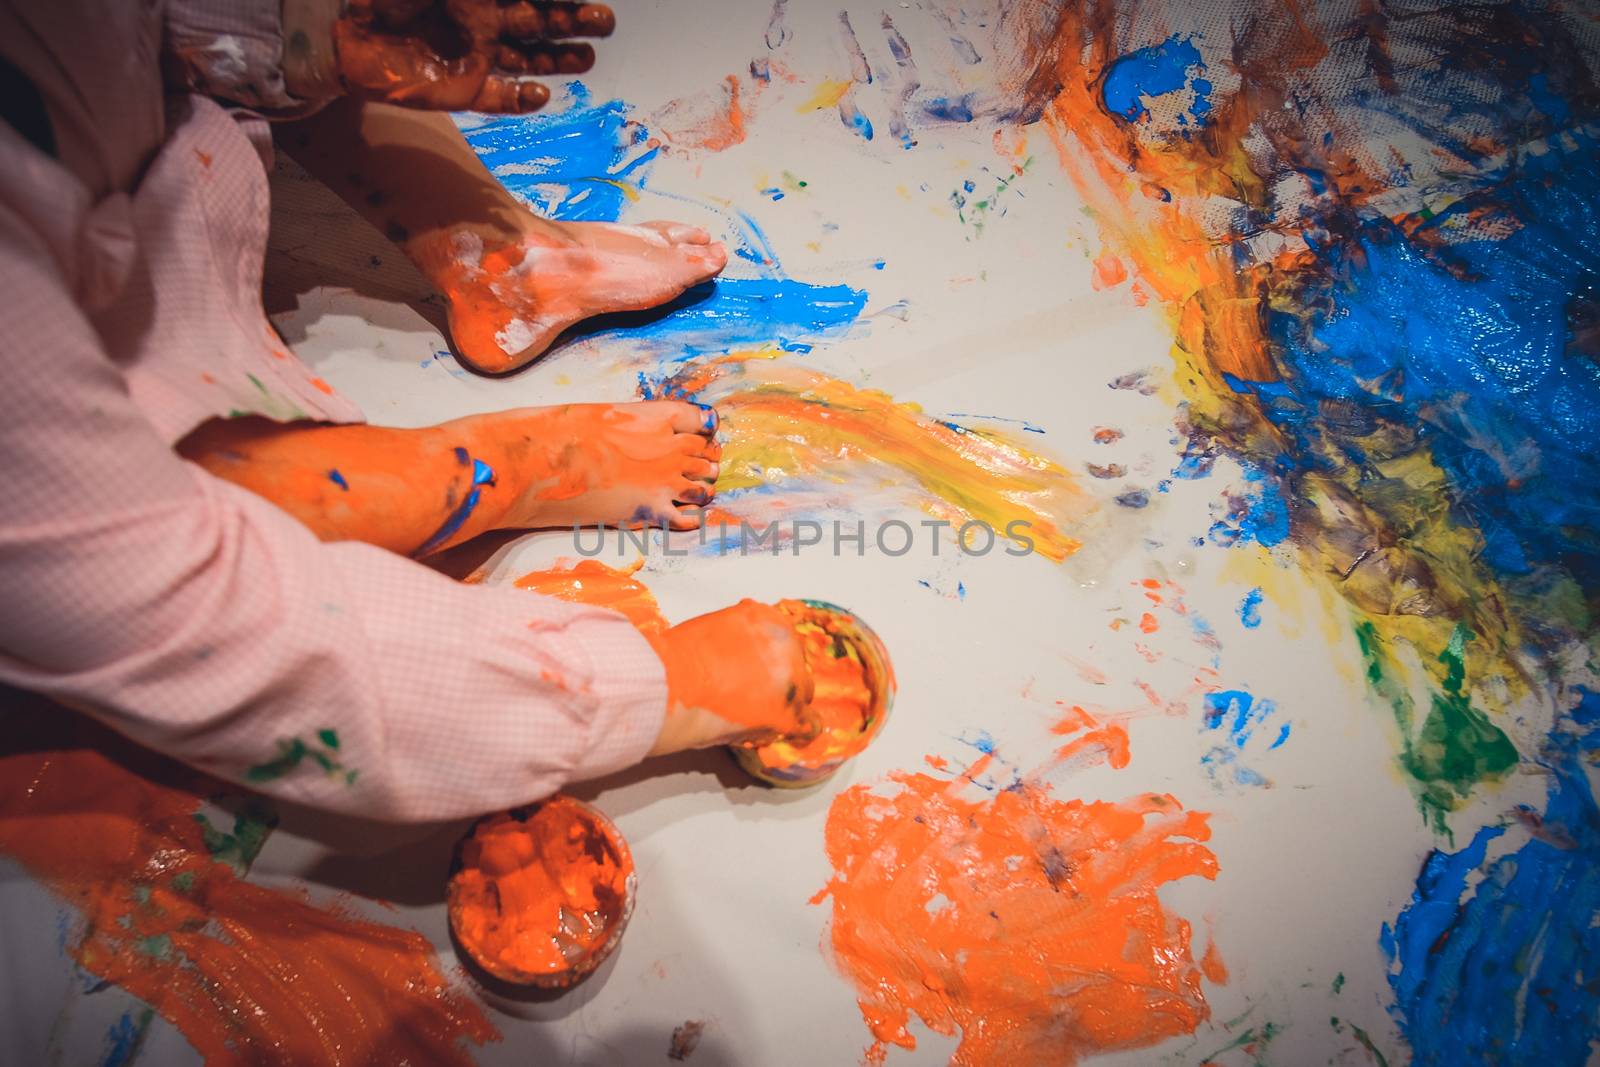 Kid hands and feet covered in colorful paintings on a paper carpet by mikelju